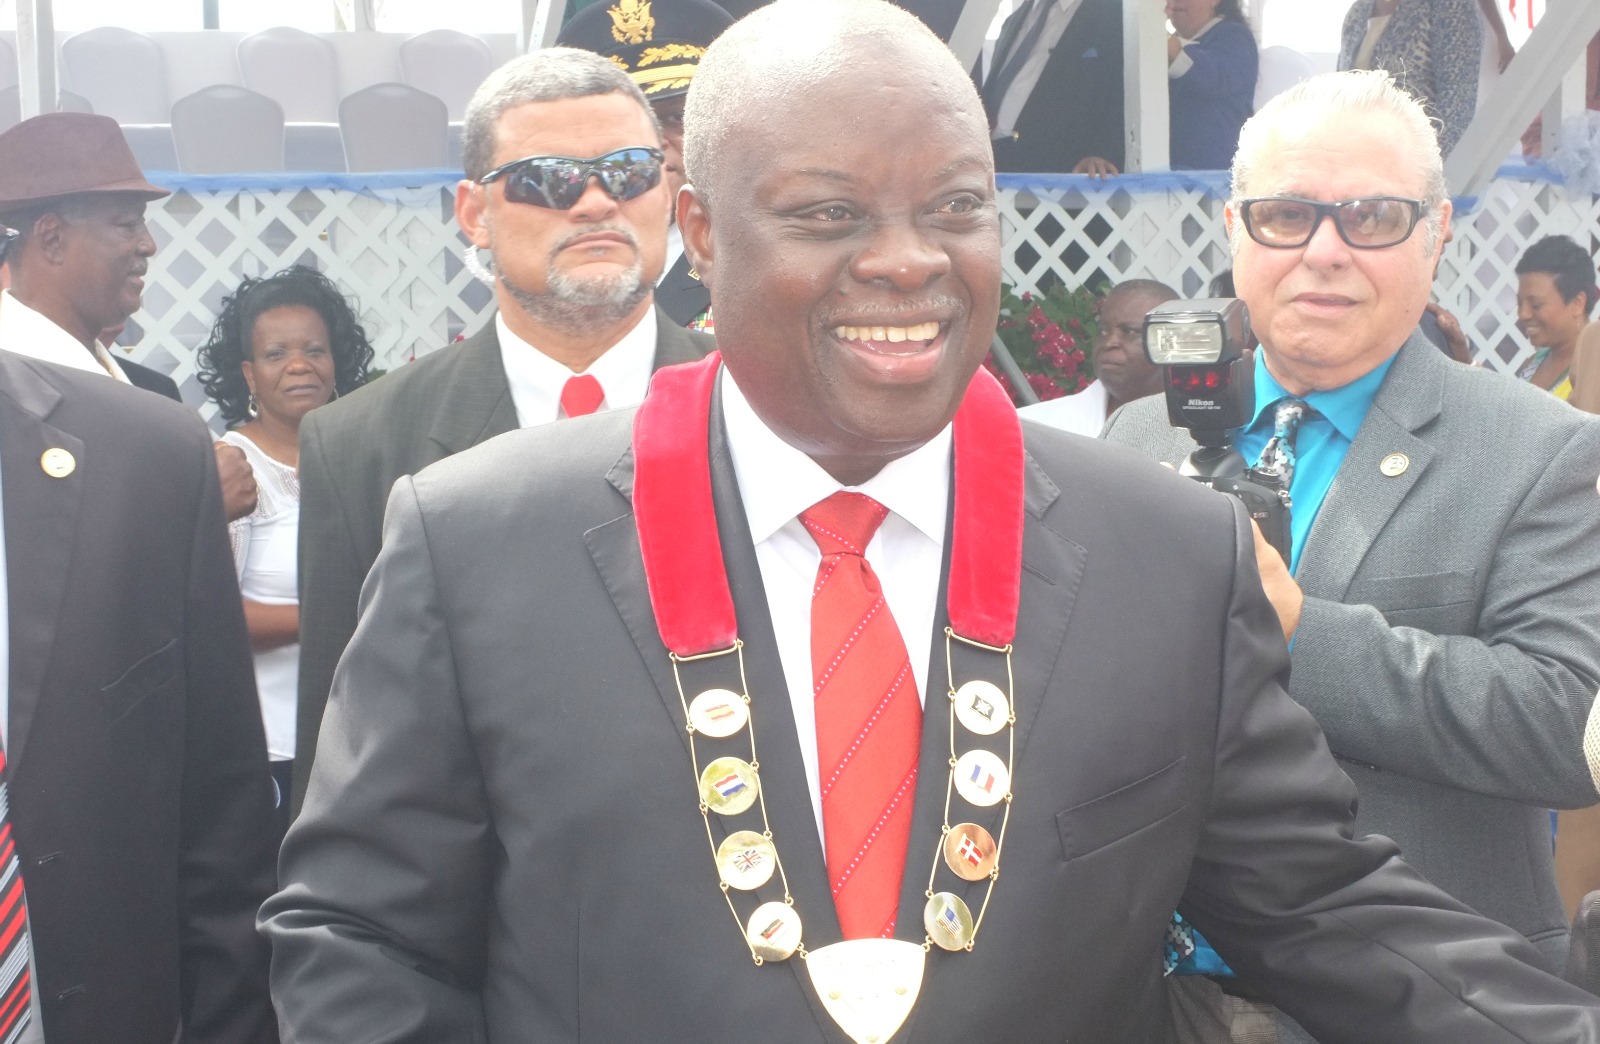 Gov. Mapp Chooses AT&T To Interface With Public Safety, Fire Services In USVI